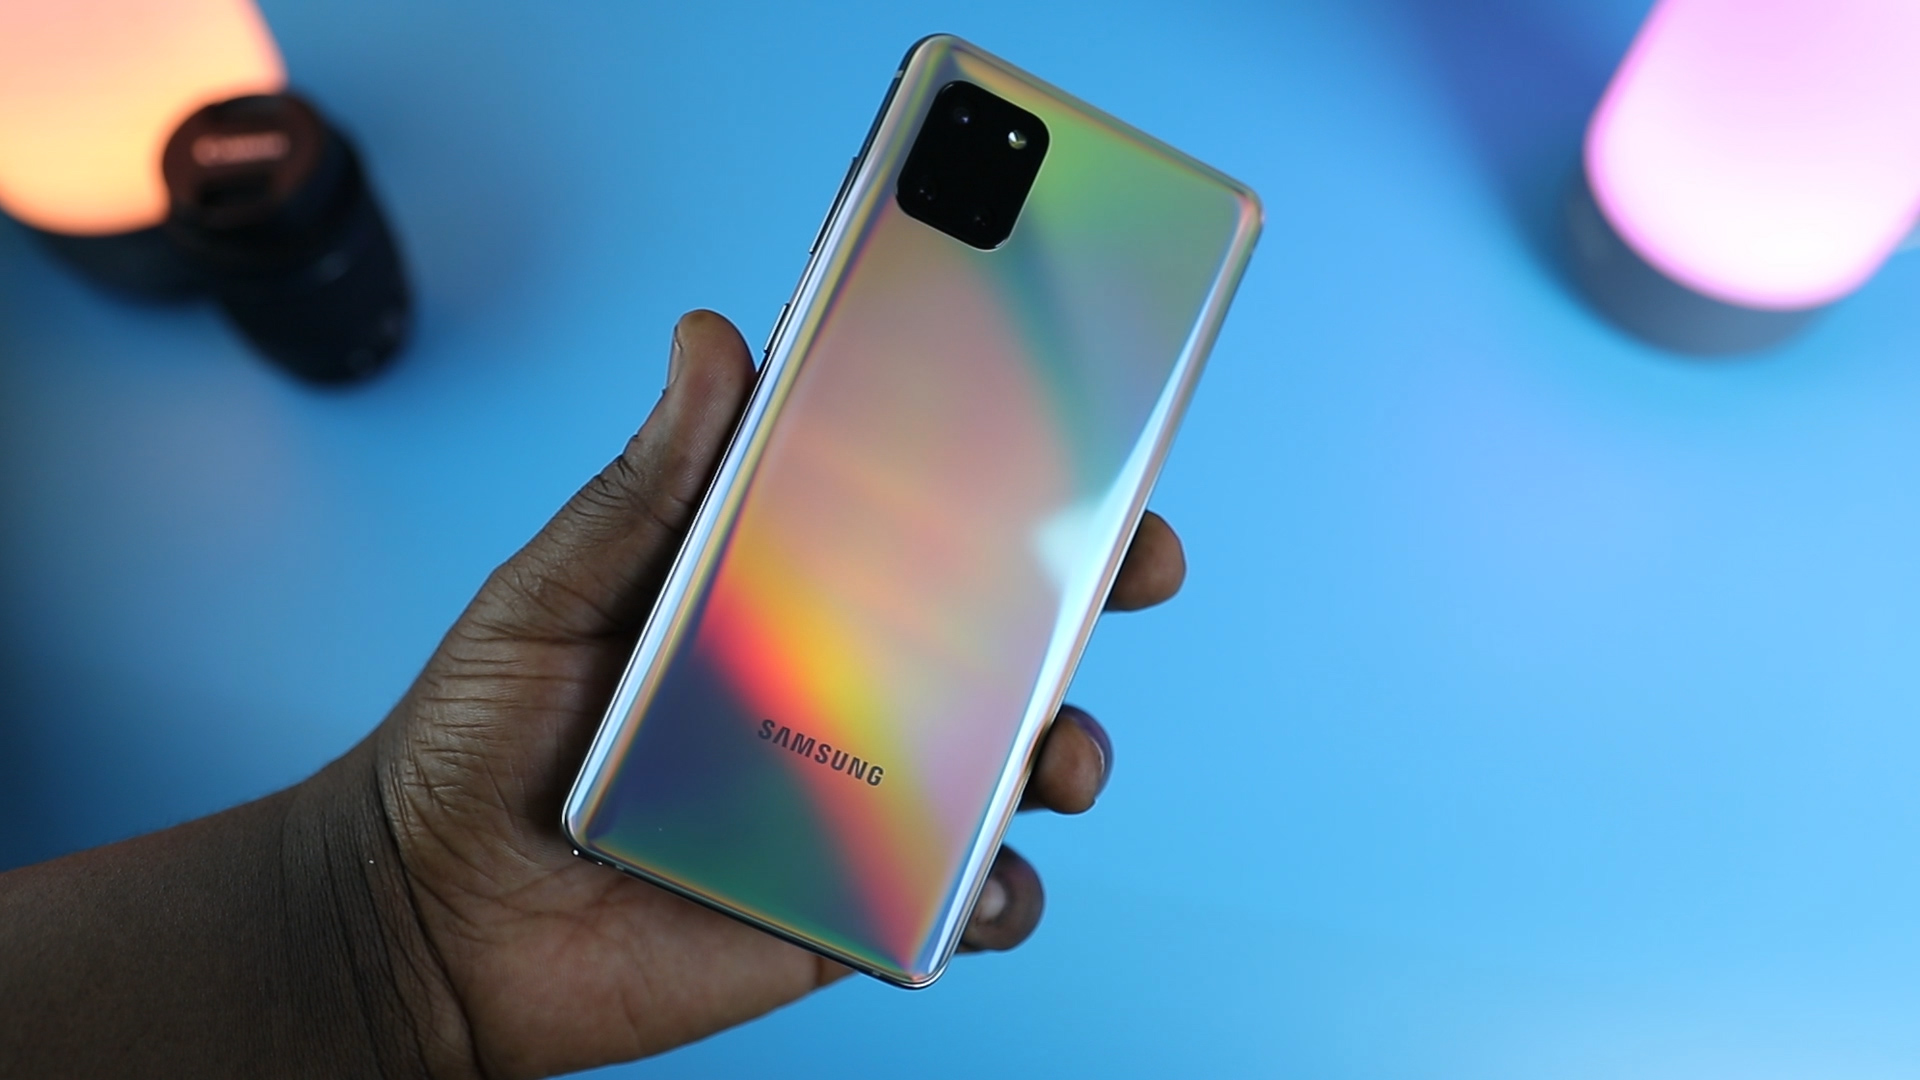 Galaxy Note 10 Lite – Just as good as the Note 10 Plus